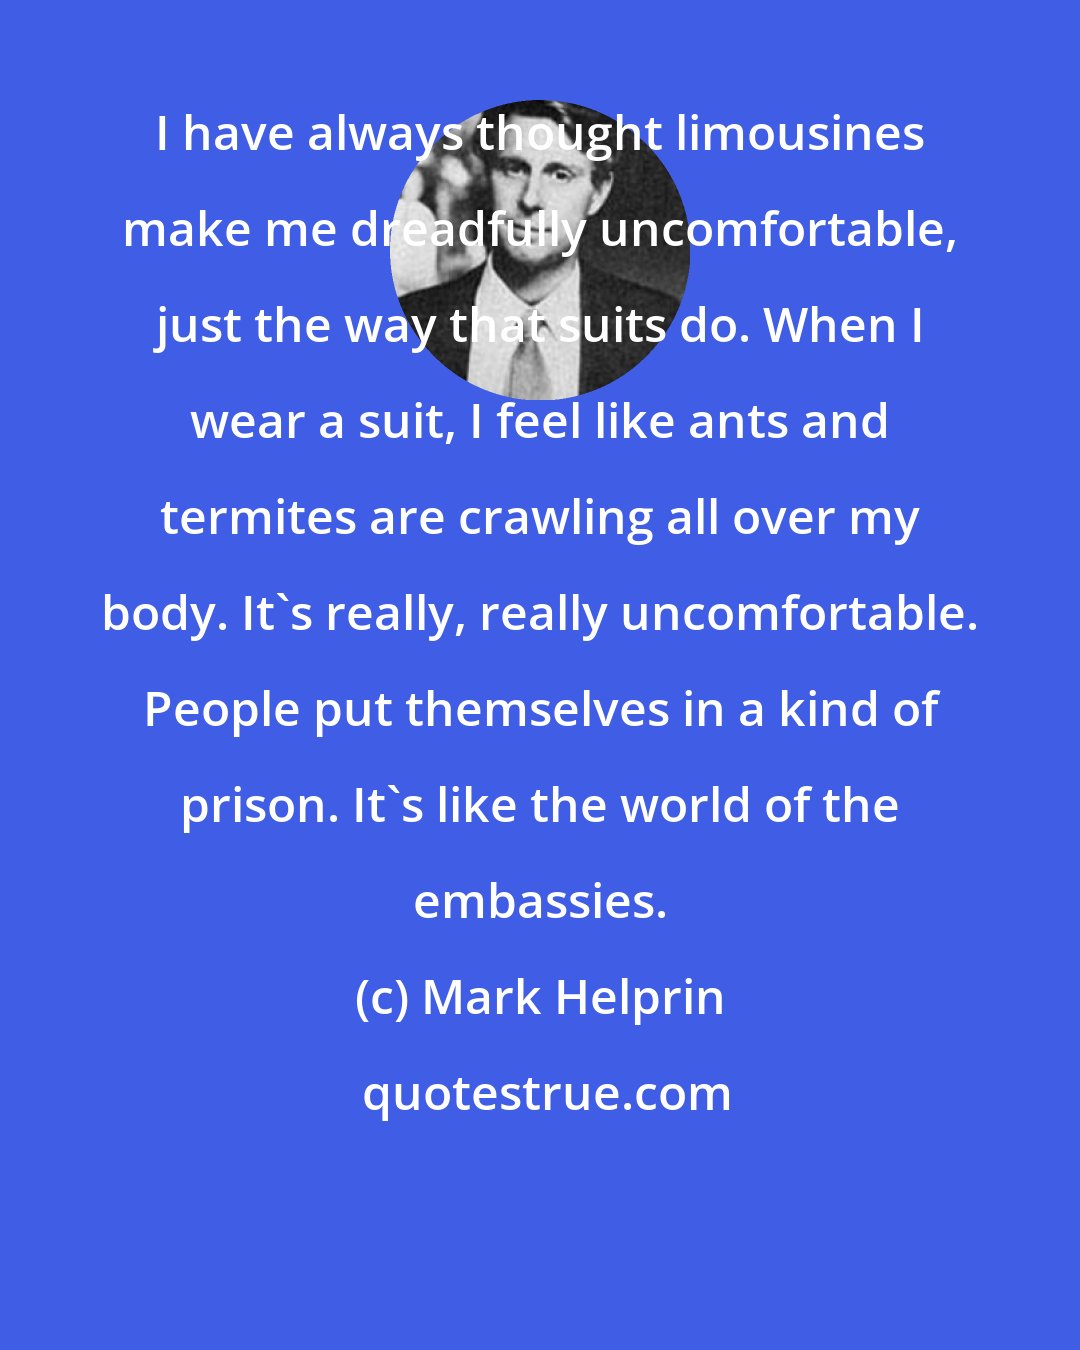 Mark Helprin: I have always thought limousines make me dreadfully uncomfortable, just the way that suits do. When I wear a suit, I feel like ants and termites are crawling all over my body. It's really, really uncomfortable. People put themselves in a kind of prison. It's like the world of the embassies.